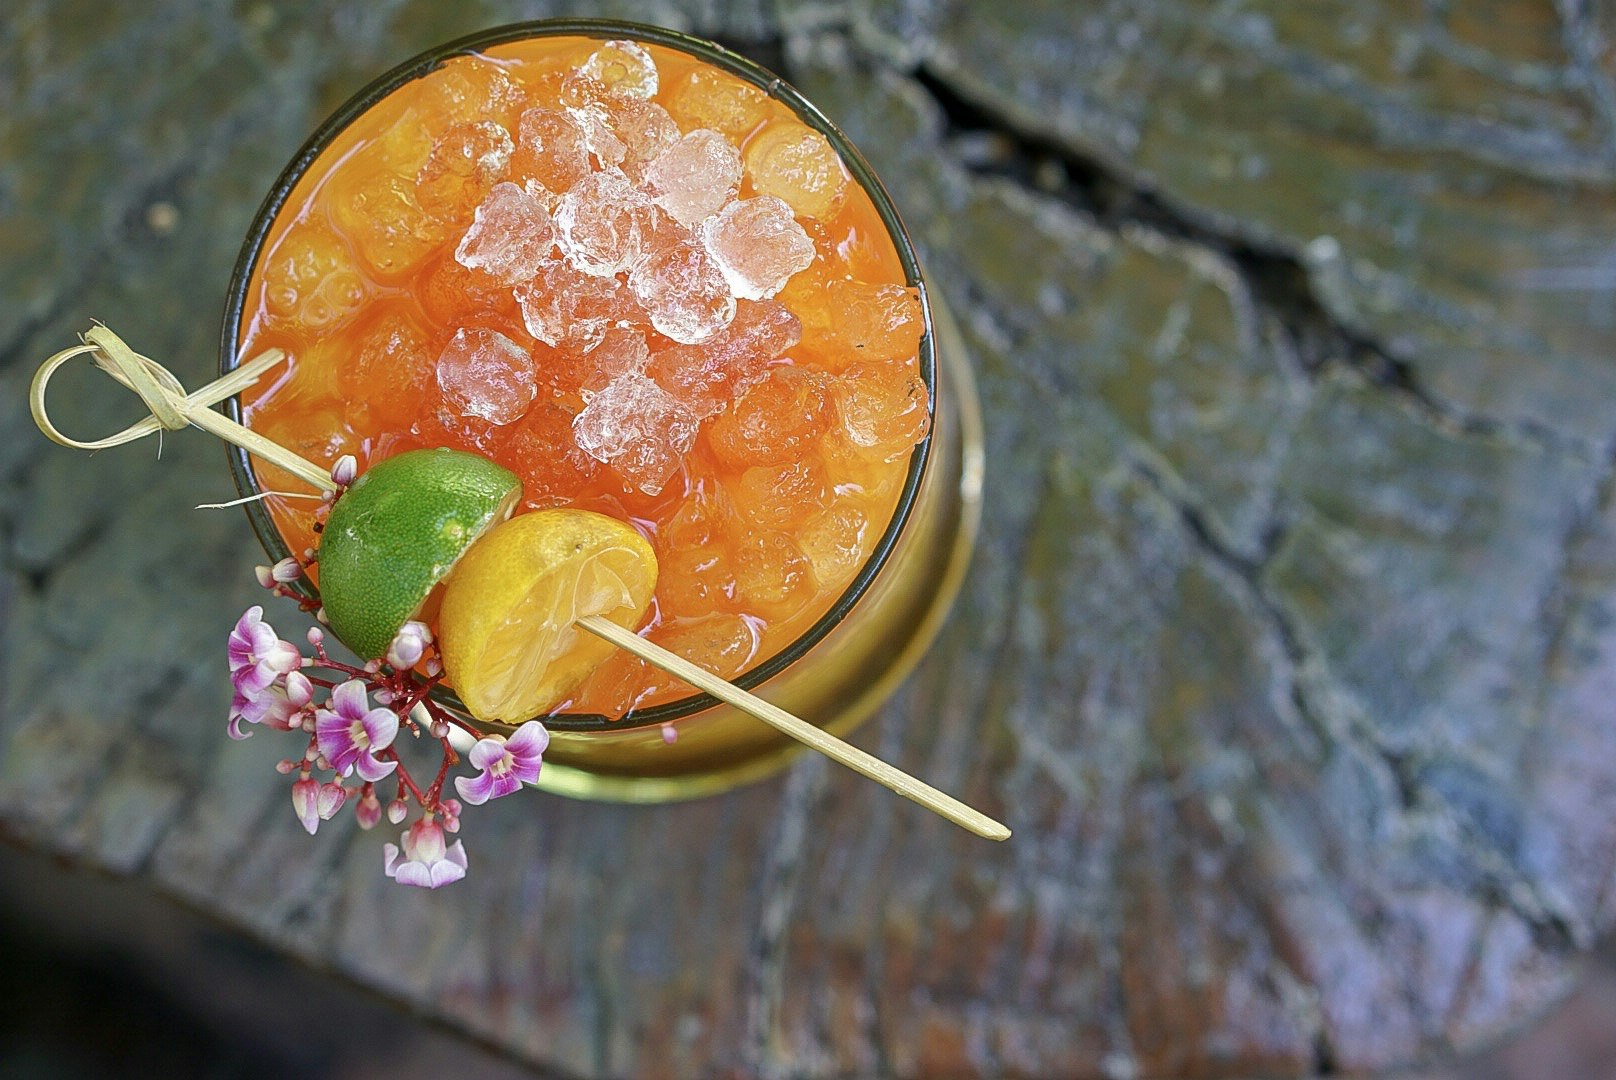 View looking directly down upon a glass containing a bright orange cocktail. The drink is muddled with crushed ice, and a wooden skewer with green and yellow fruits rests artfully across the rim, as well as a delicate sprig of flowers.